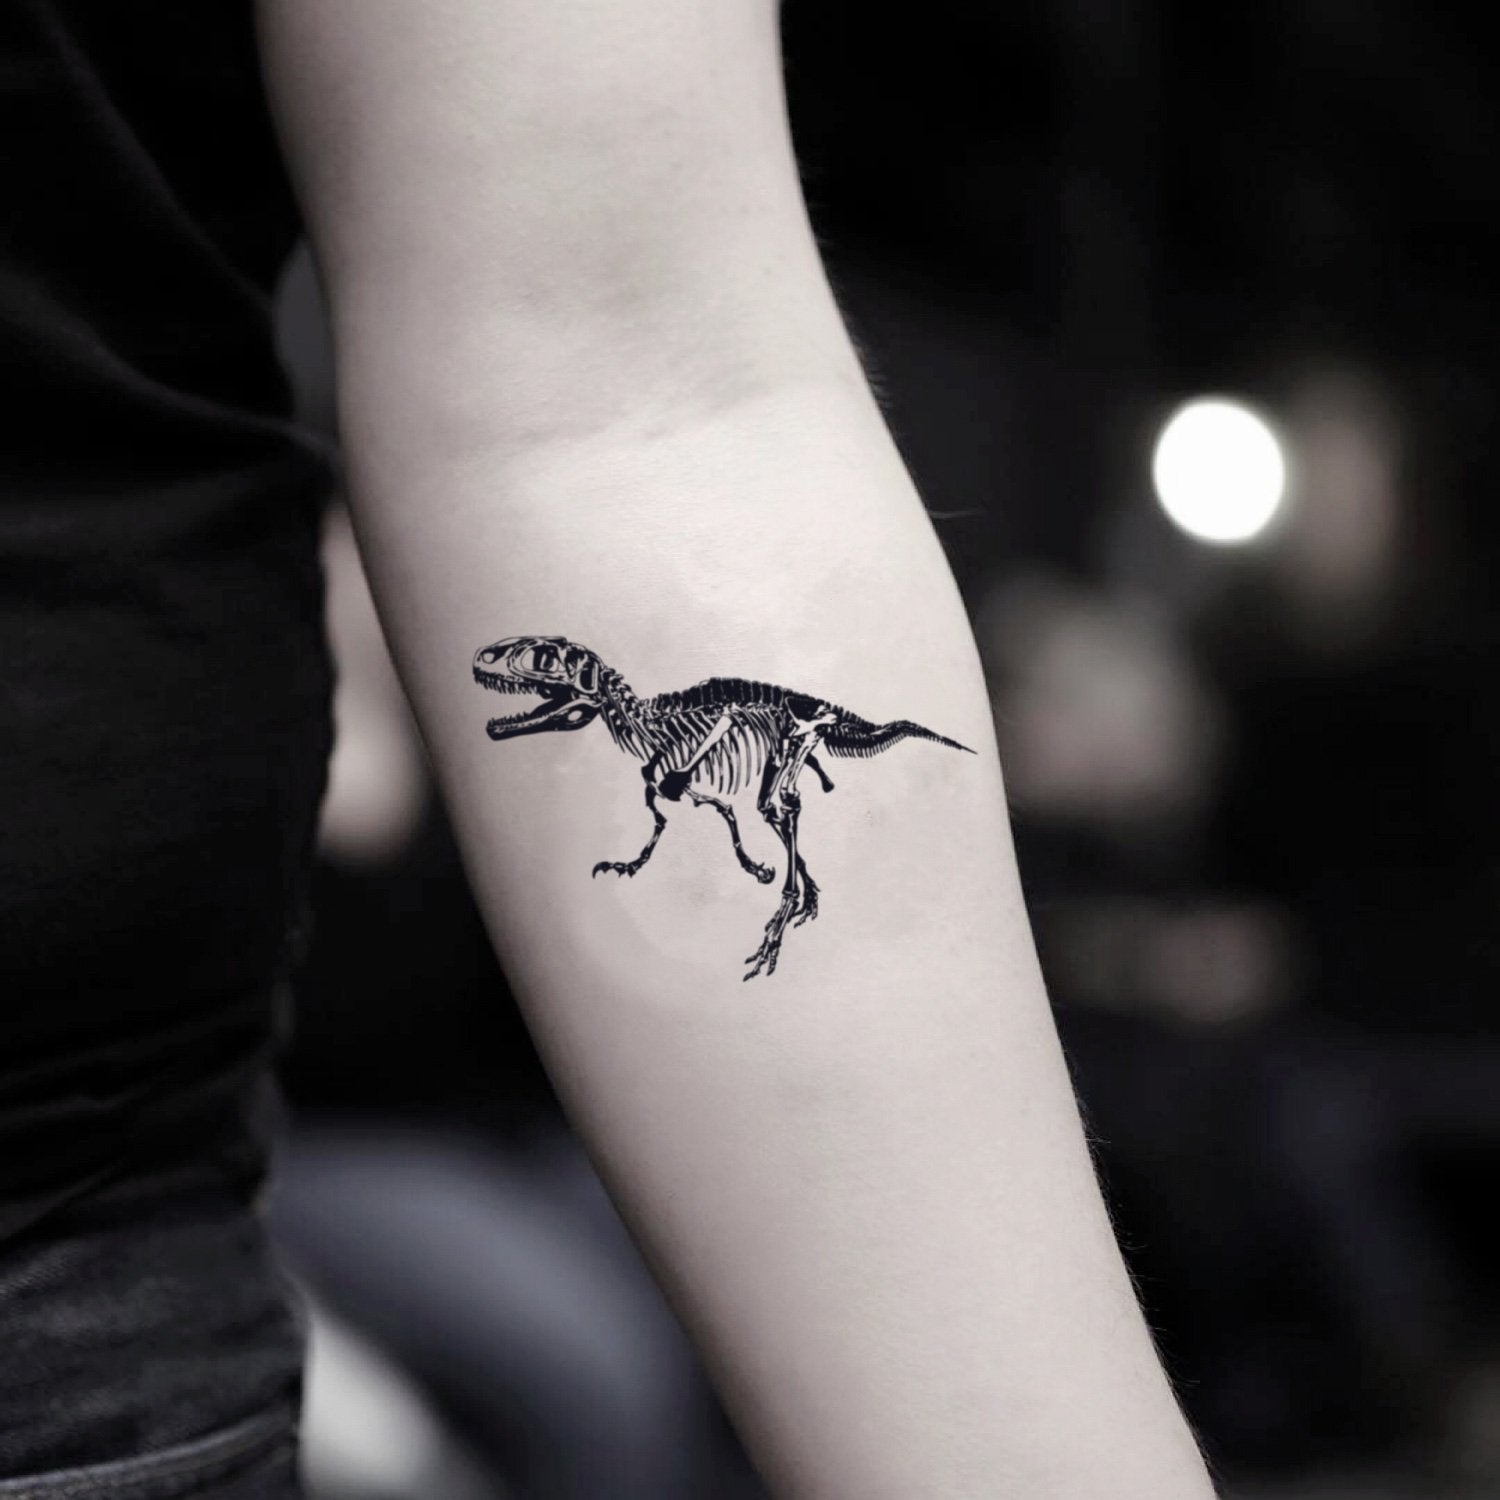 National Velociraptor Awareness Day Here are 7 tattoo ideas to get inked  to celebrate  MEAWW